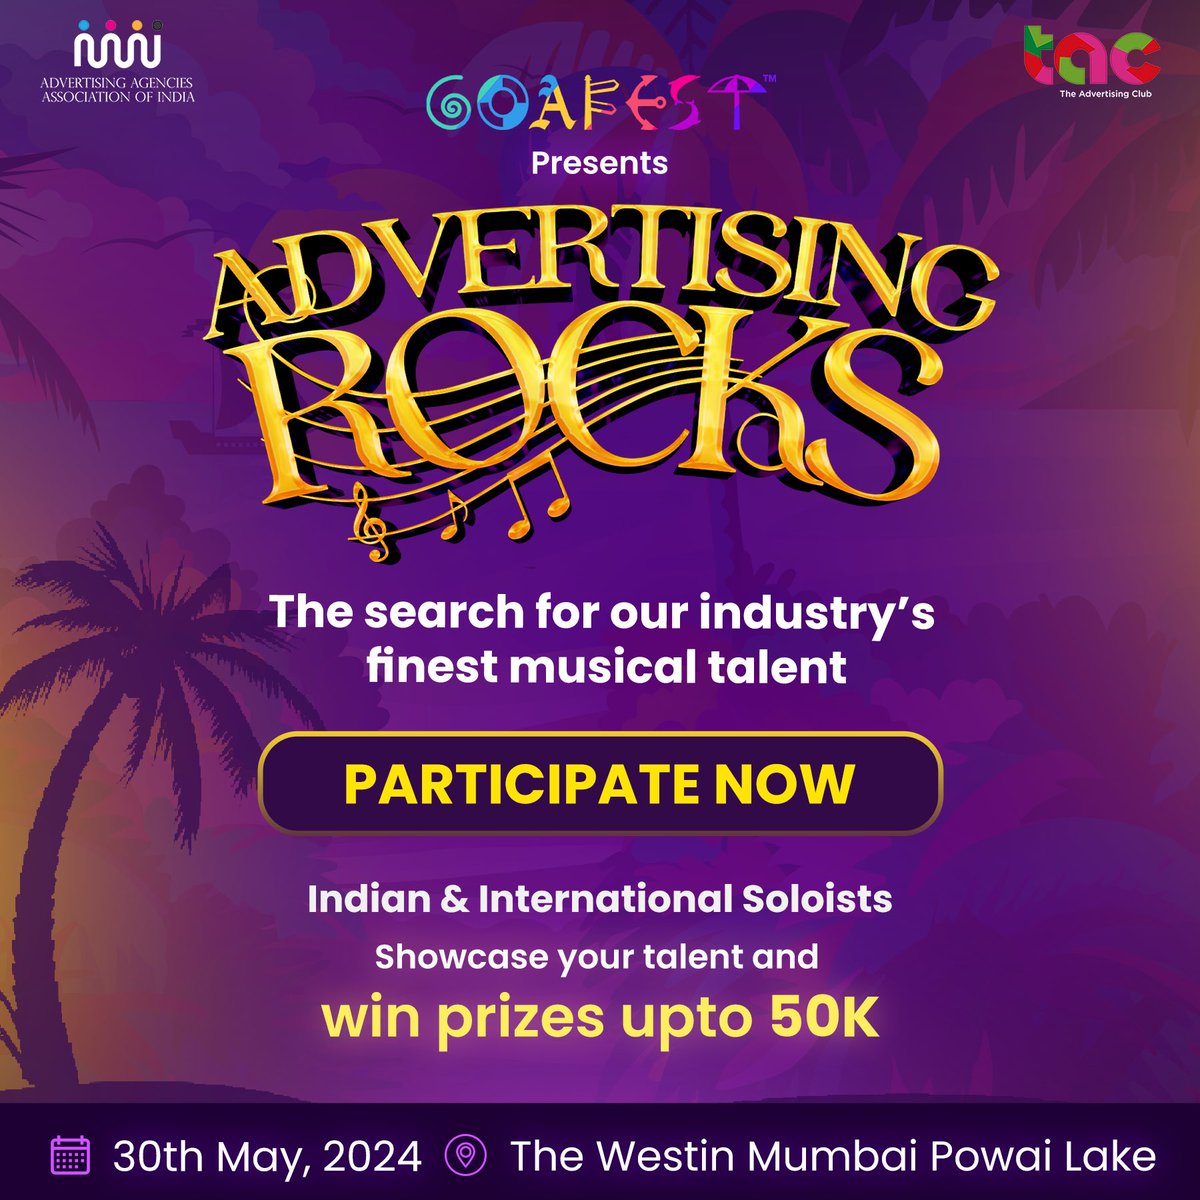 Calling all advertising rockstars! #AdvertisingRocks returns to #Goafest2024 Categories: Indian & International soloists Submit your entries by May 15th for a chance to win prizes up to 50k! Rock and enROLL now bit.ly/3xUxjhy 🎶